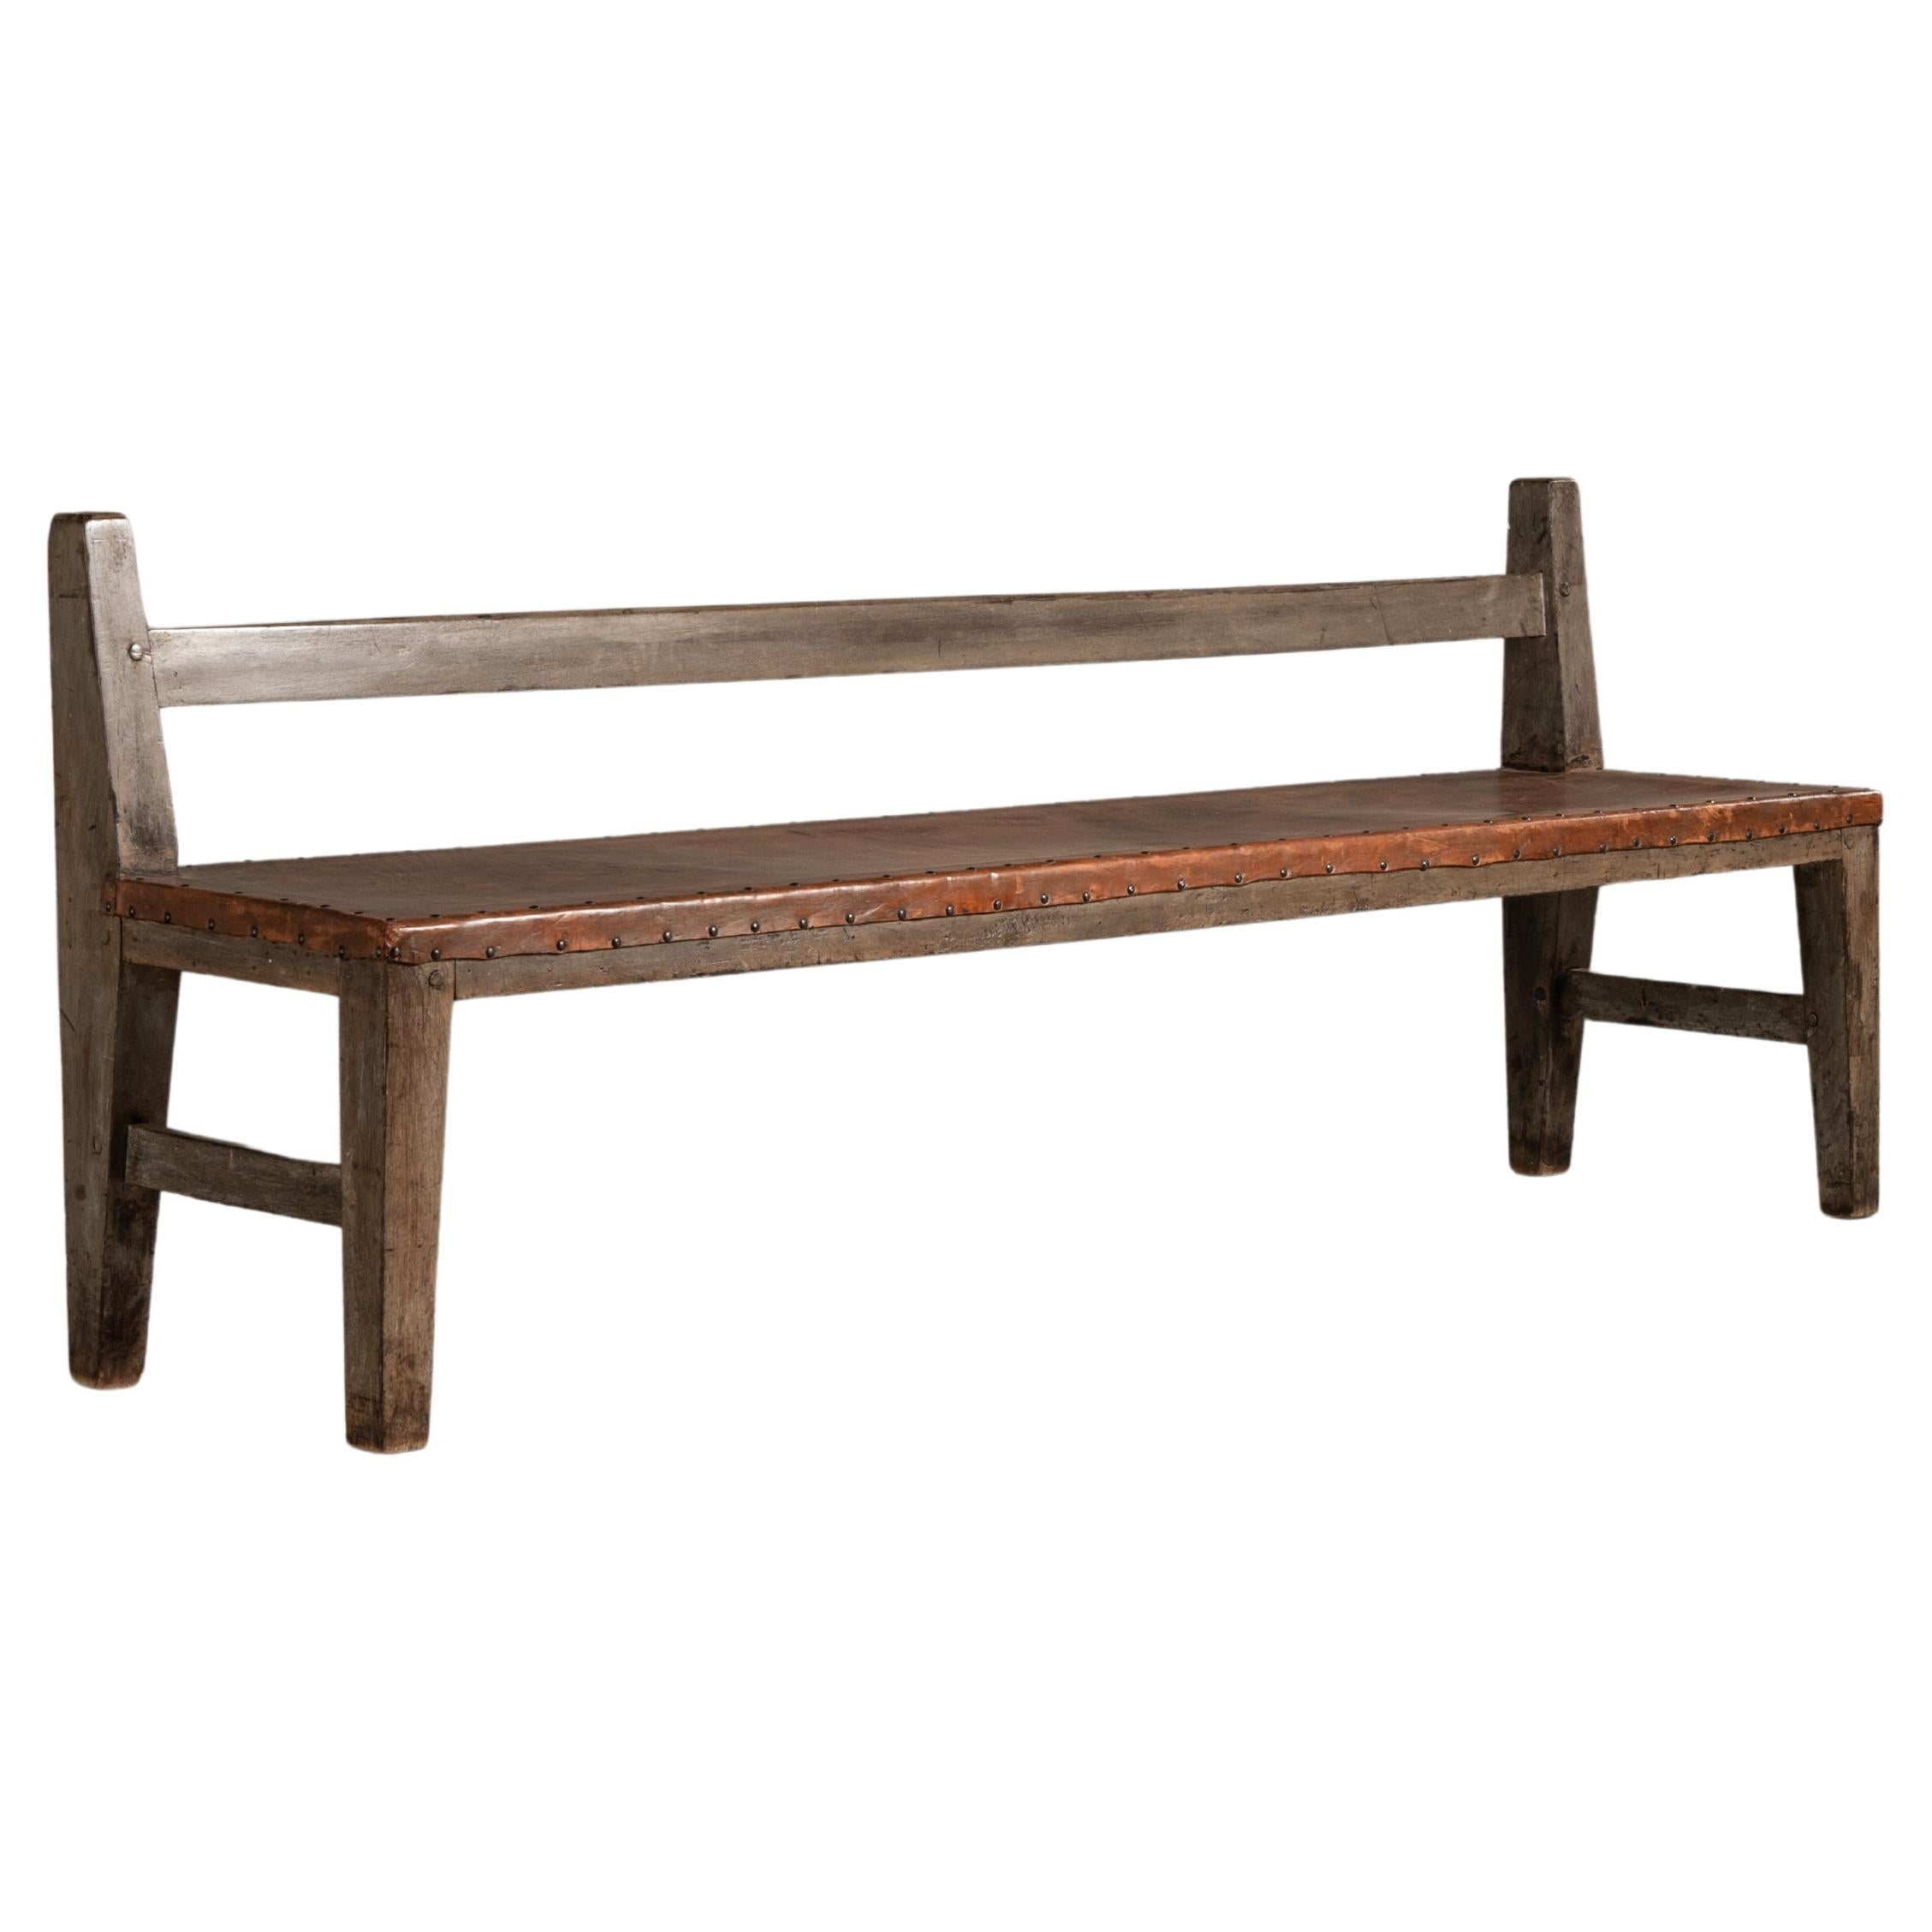 Patinated 19th Century Bench in Solid Wood and Leather, Brazilian Design For Sale